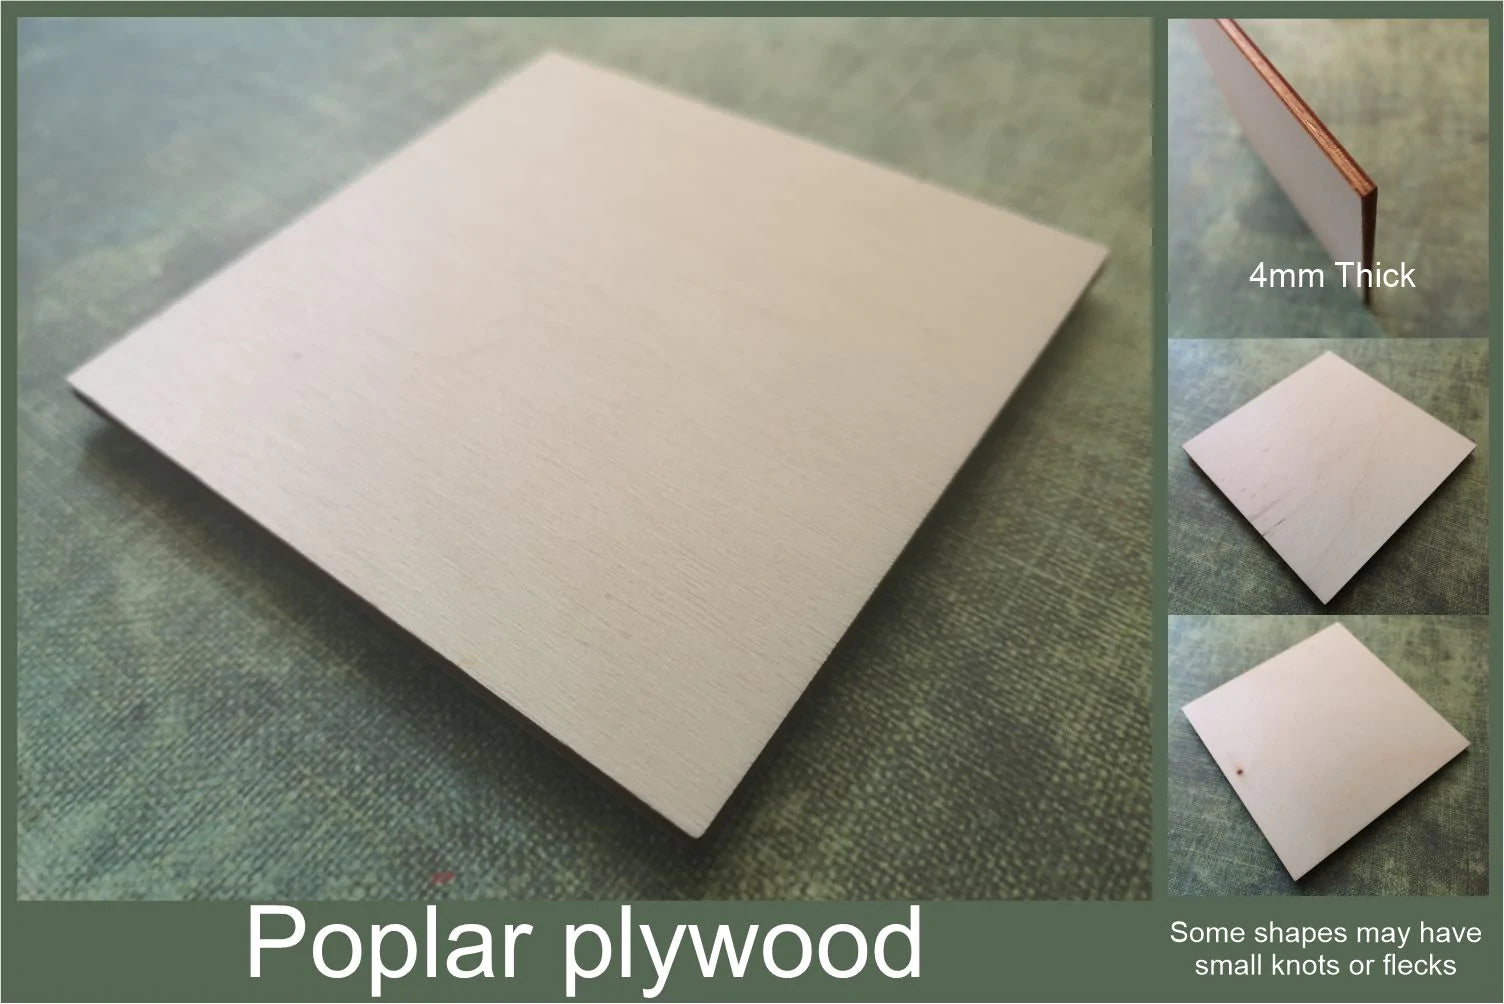 4mm thick poplar plywood used to make the Typhoon jet plane cut-outs ready for crafting